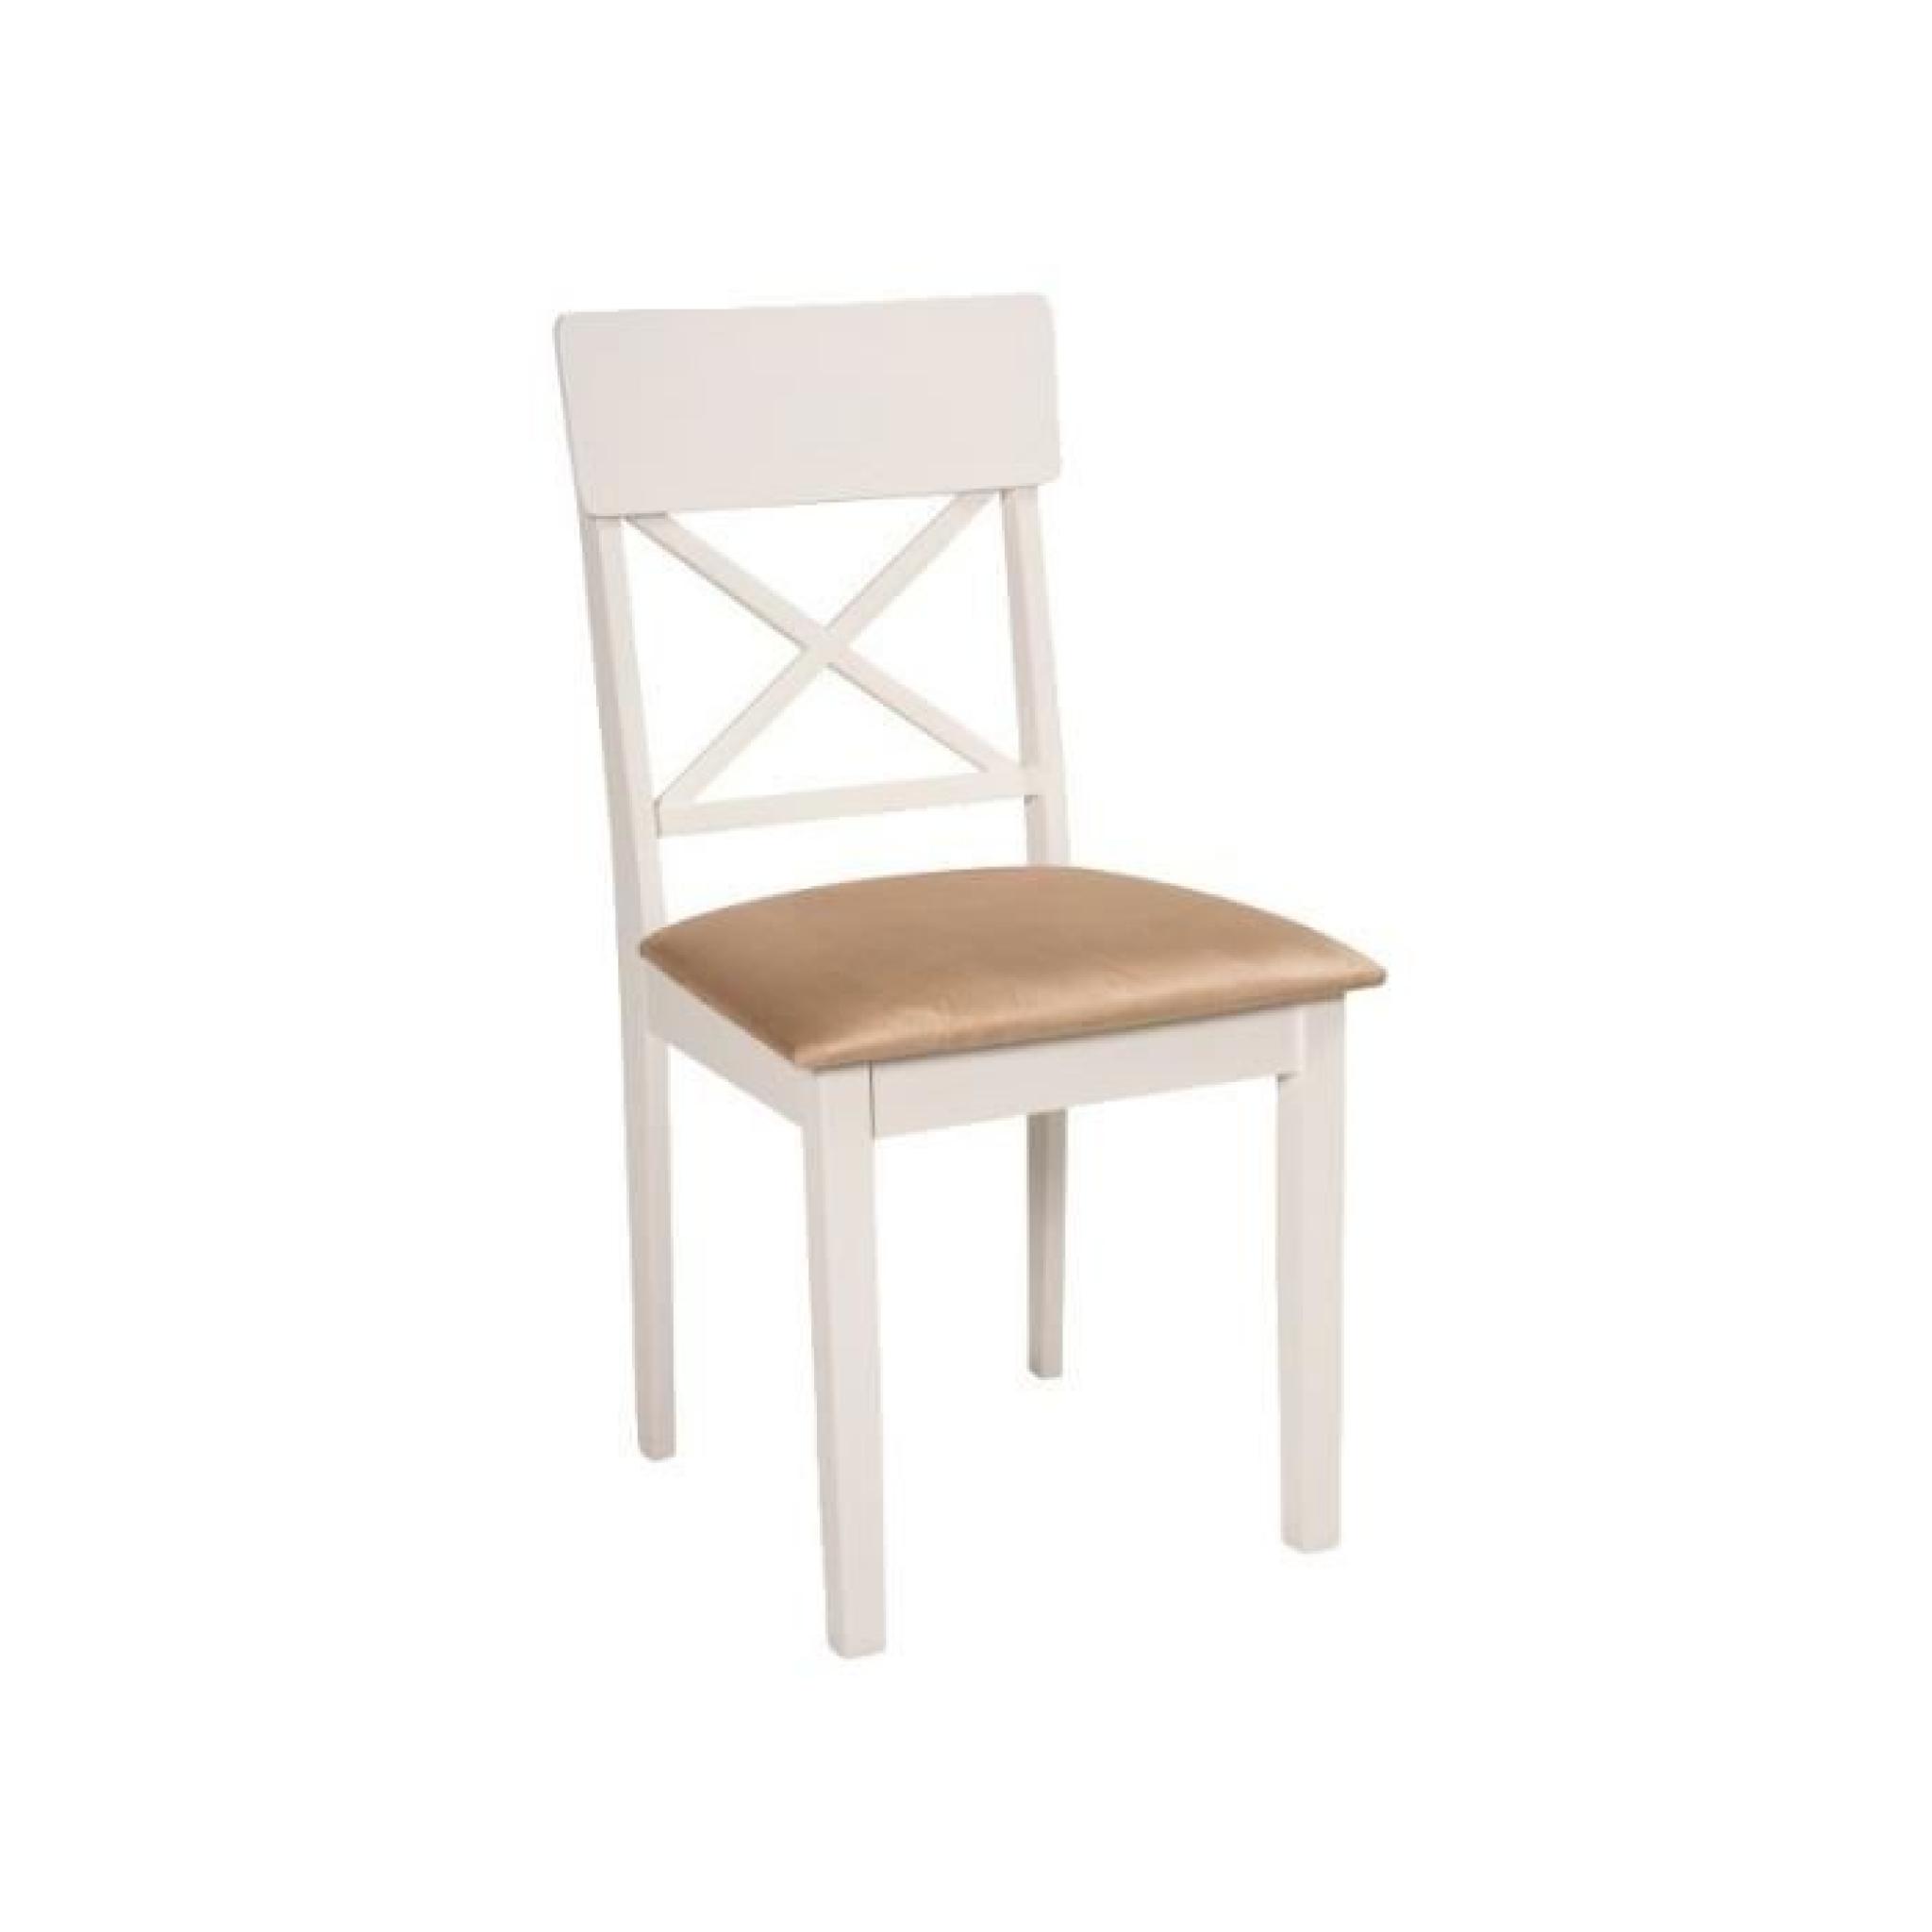 JUSThome Rob Chaise Blanc 89 x 45 x 40